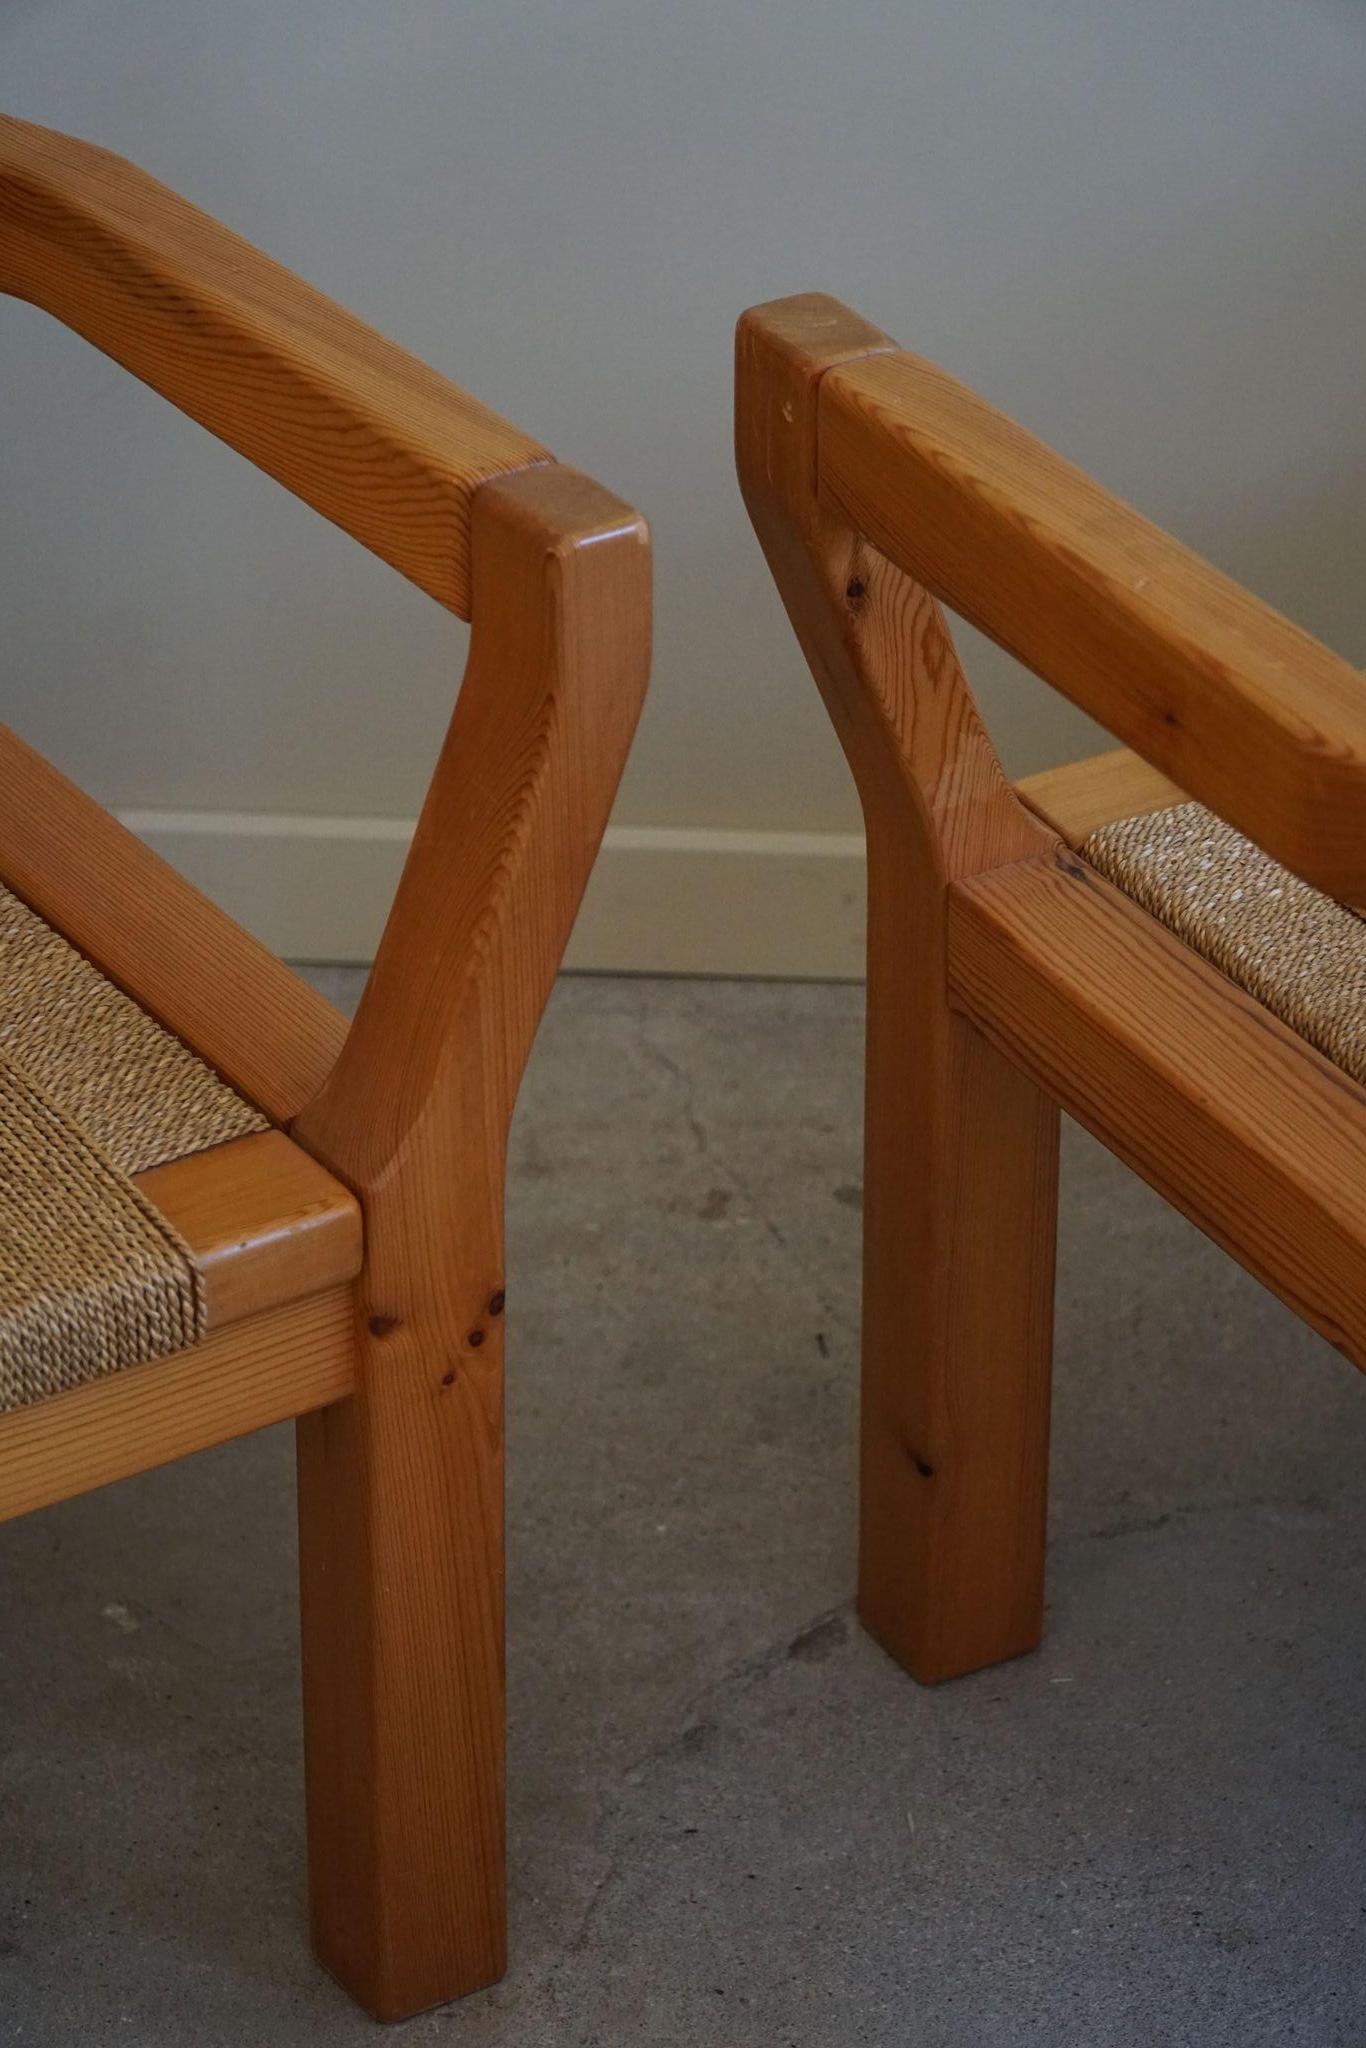 Tage Poulsen, A Pair of Brutalist Chairs in Pine & Cord, Danish Modern, 1970s For Sale 13